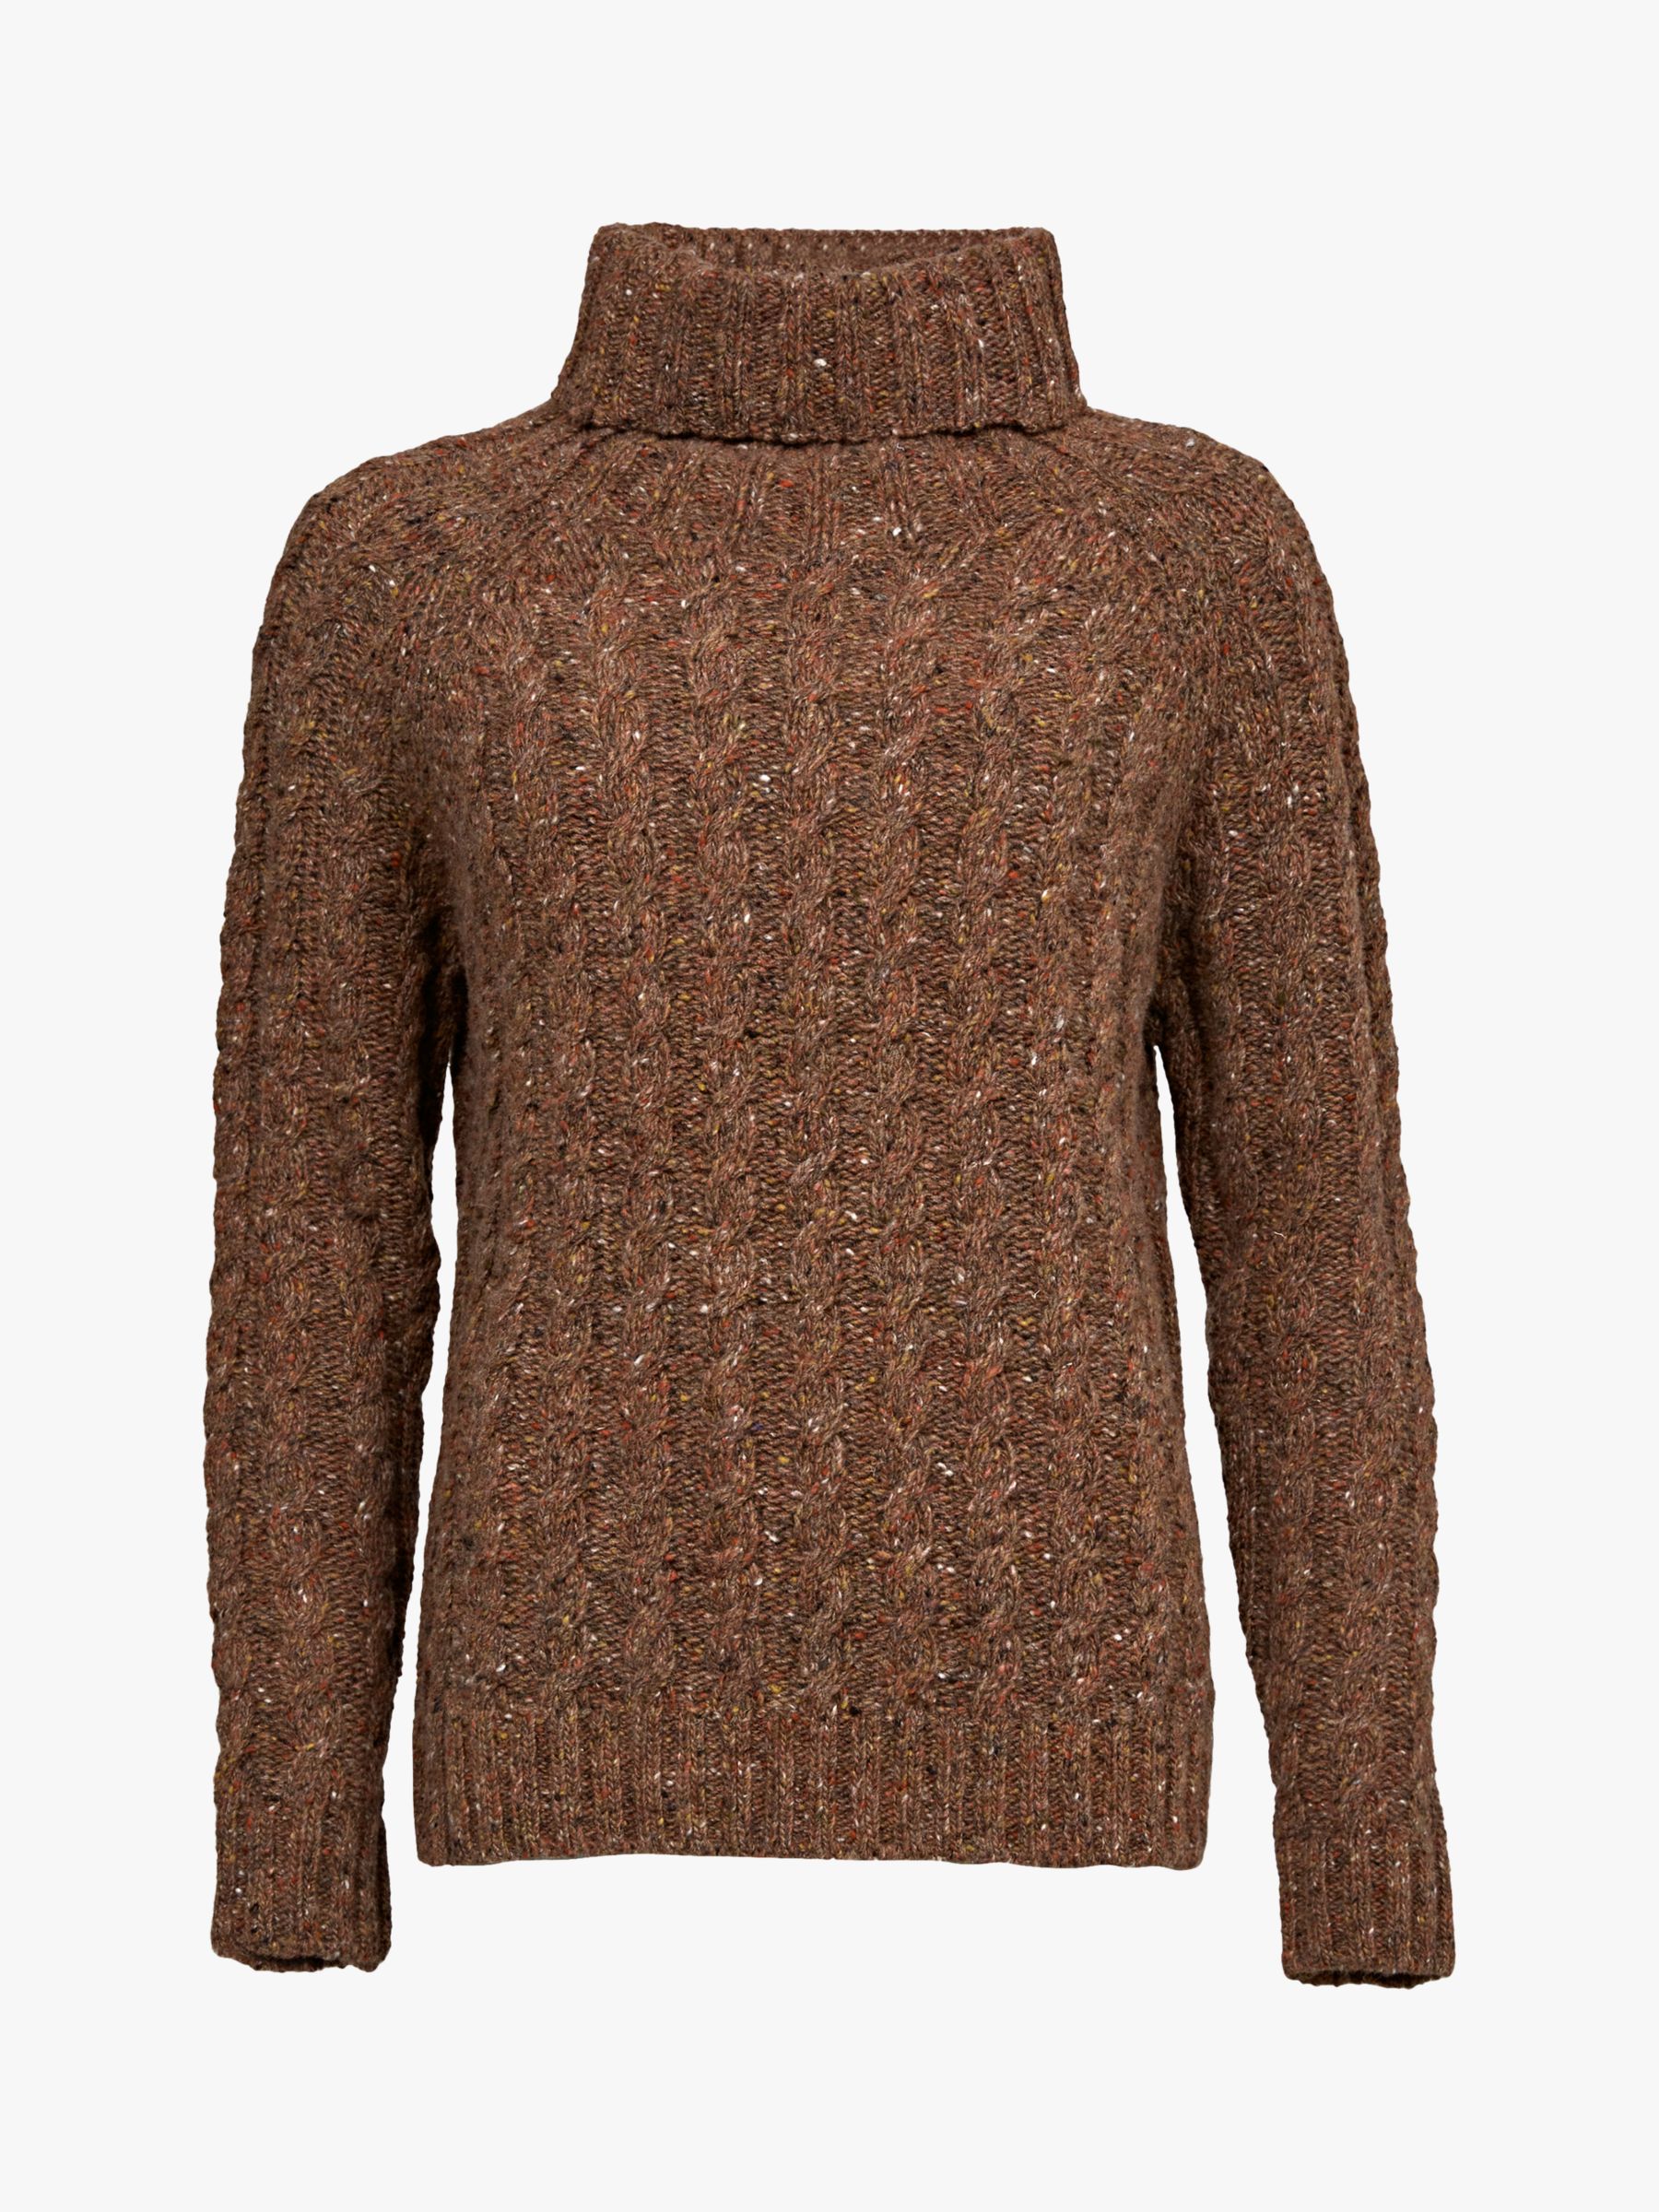 Celtic & Co. Donegal Cable Roll Neck Jumper, Rust at John Lewis & Partners